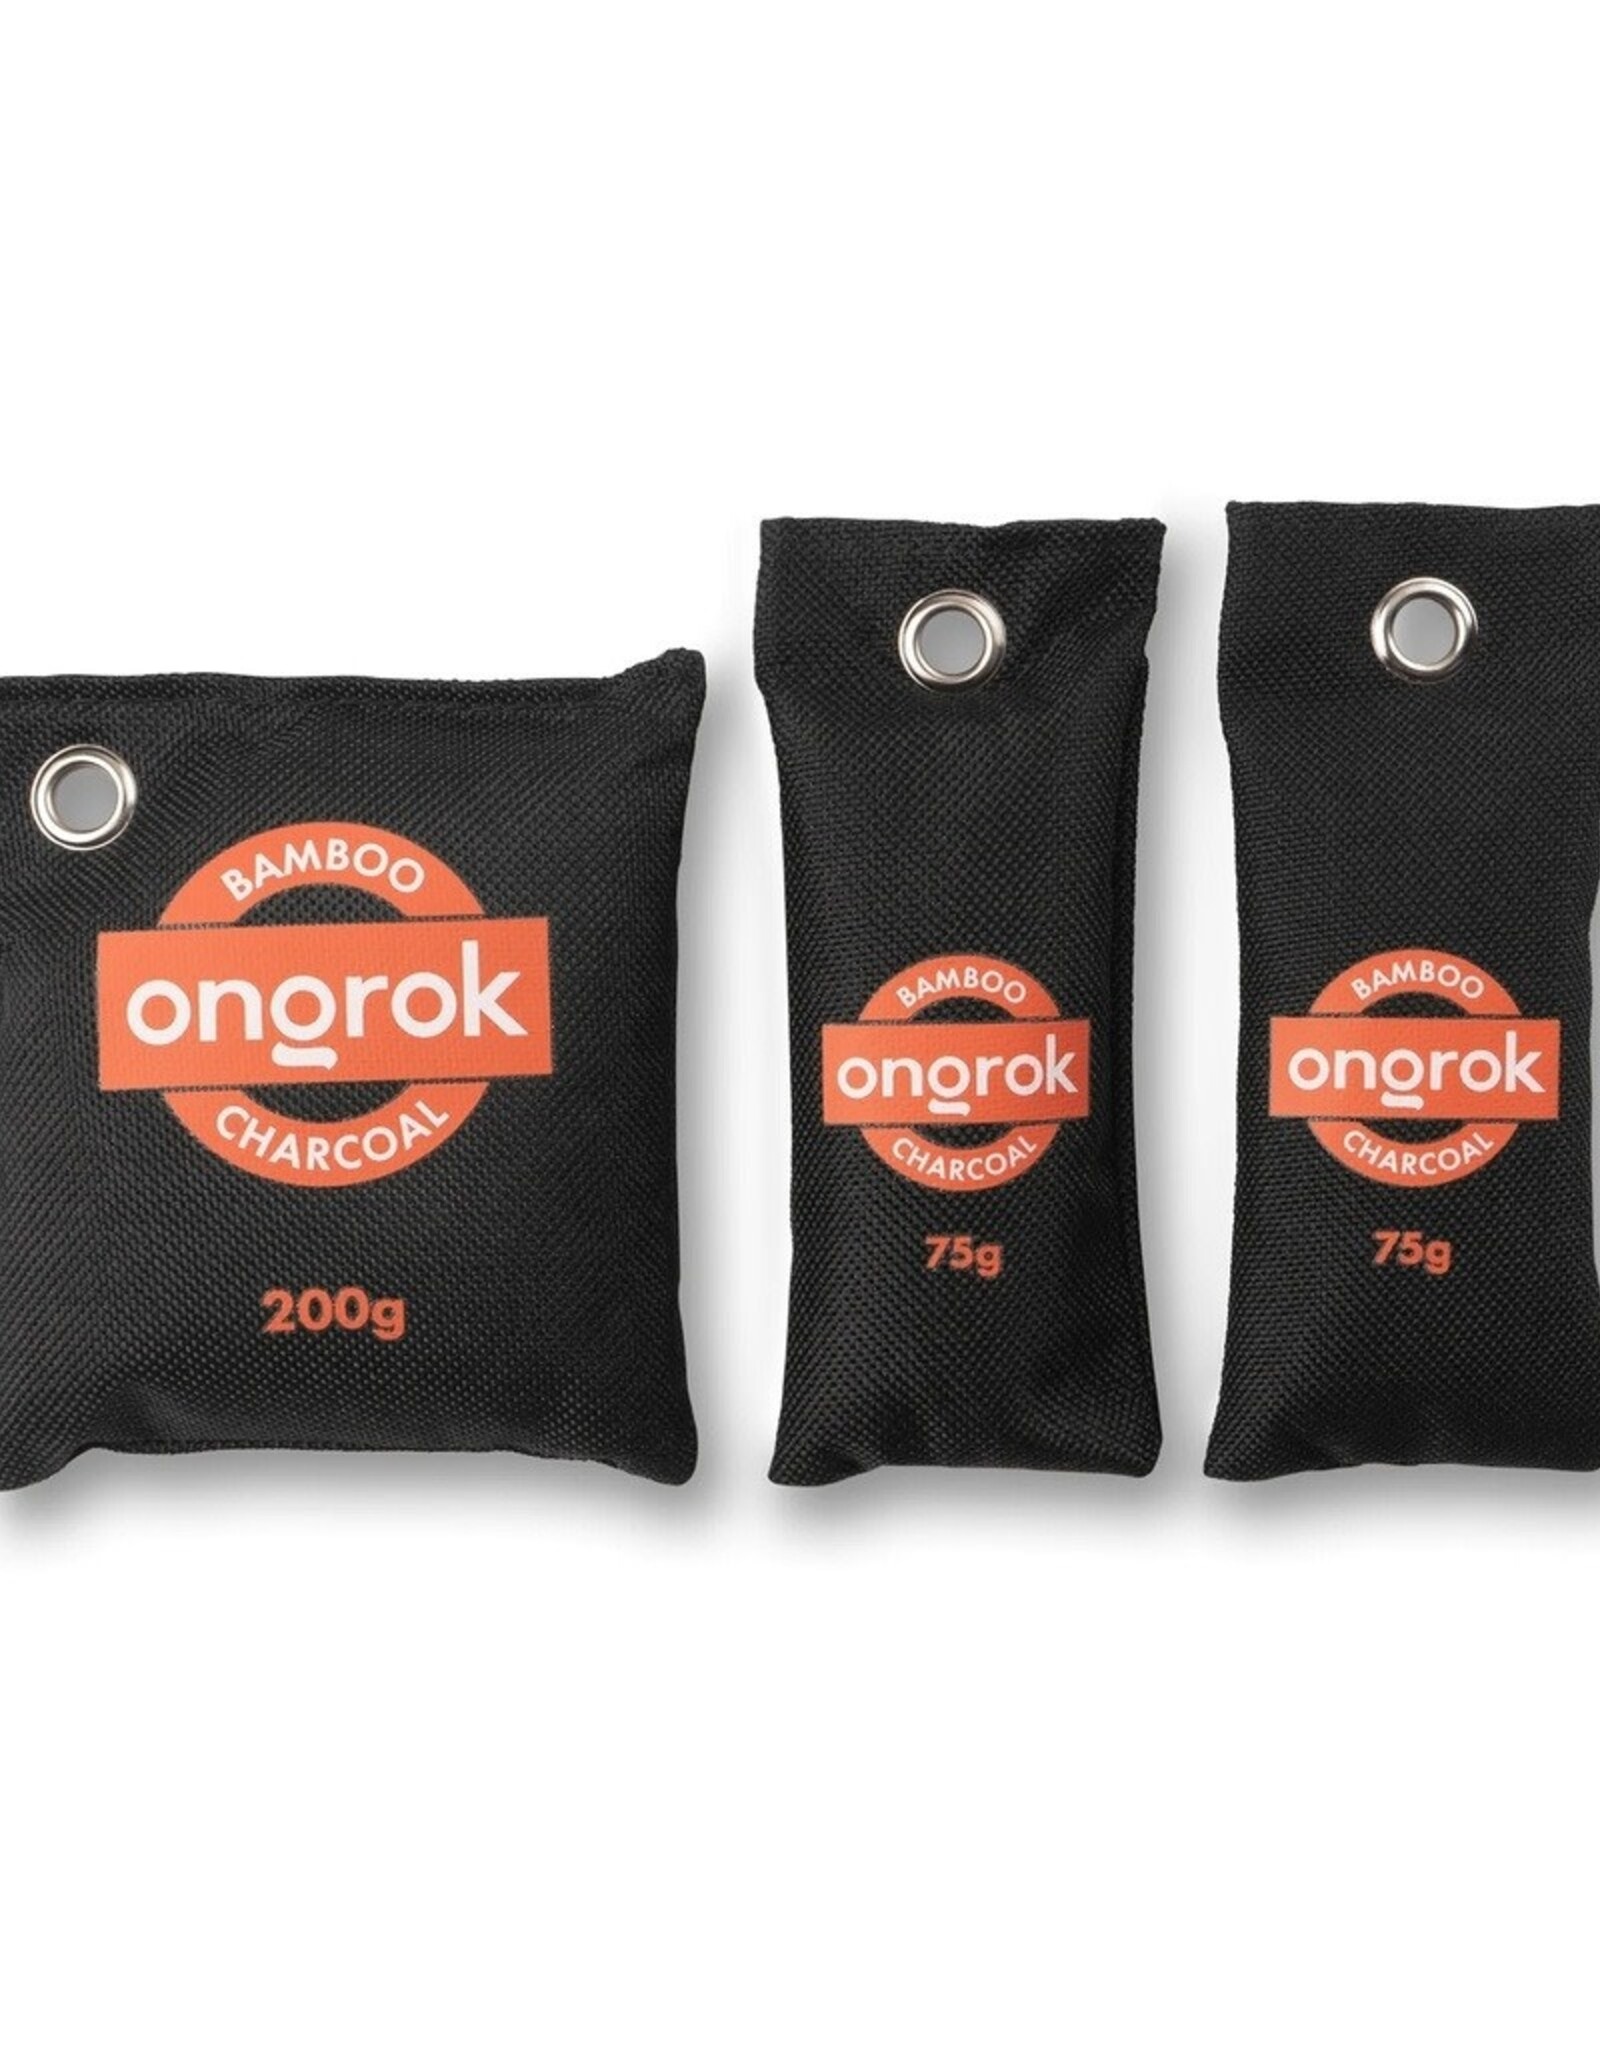 Ongrok Air Purifying Charcoal Bamboo Bags - MultiPack